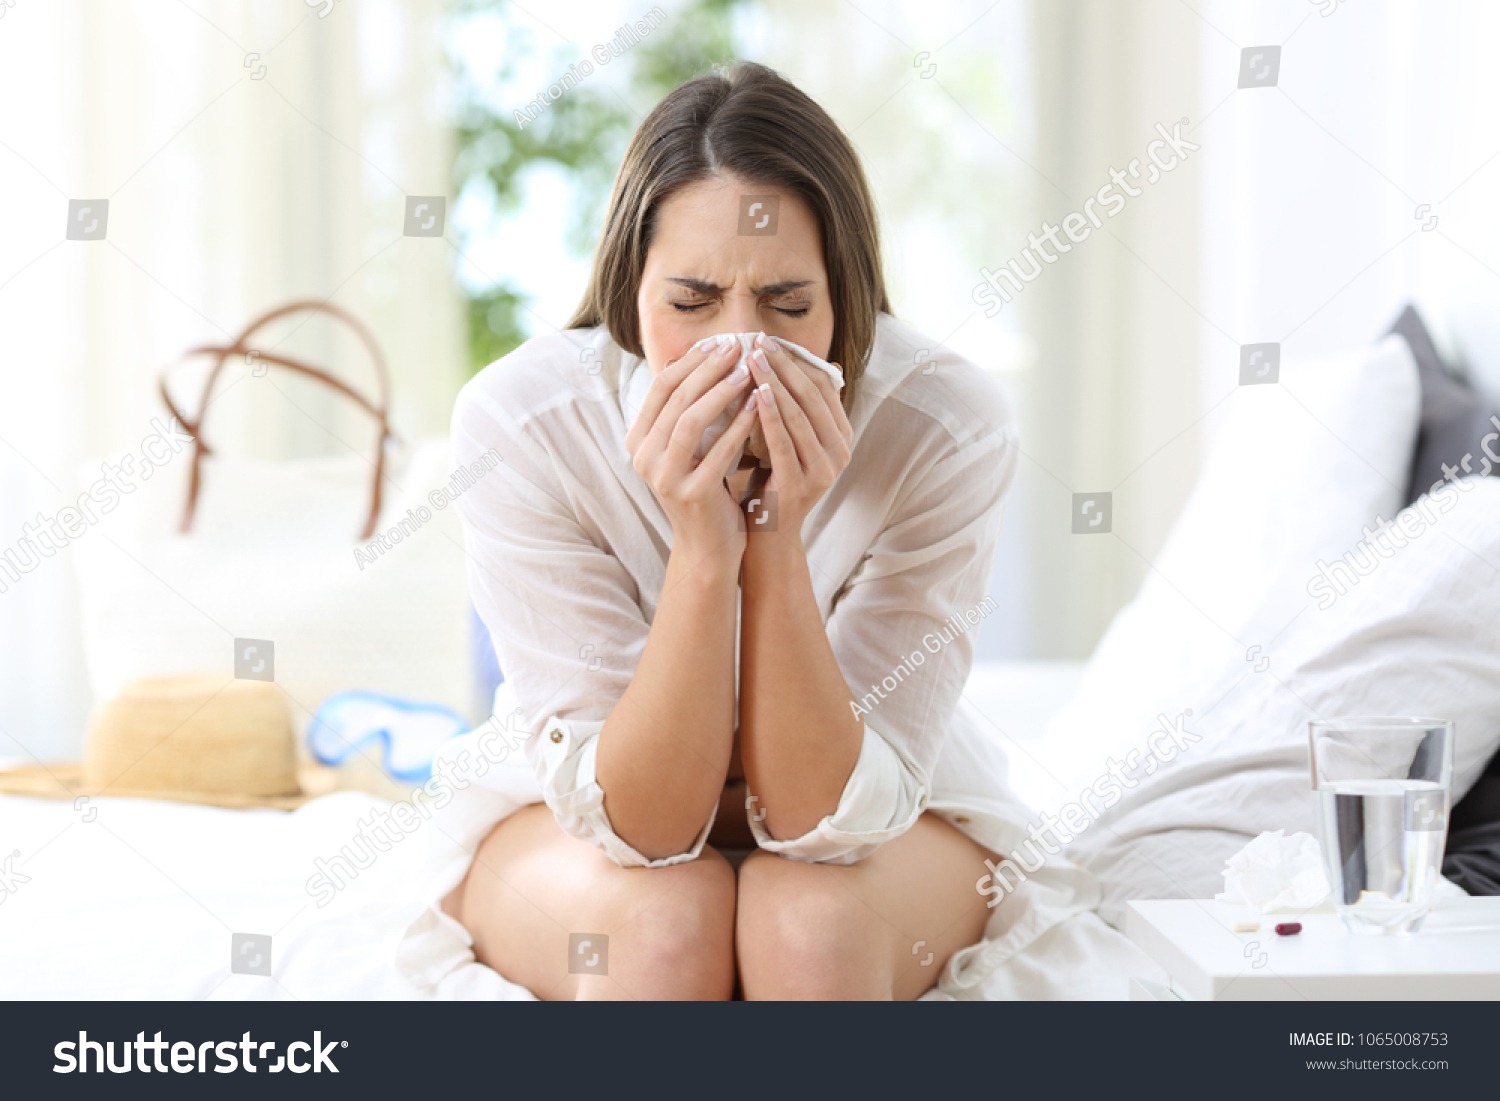 stock-photo-ill-woman-coughing-in-an-hotel-room-on-summer-vacations-on-the-beach-1065008753